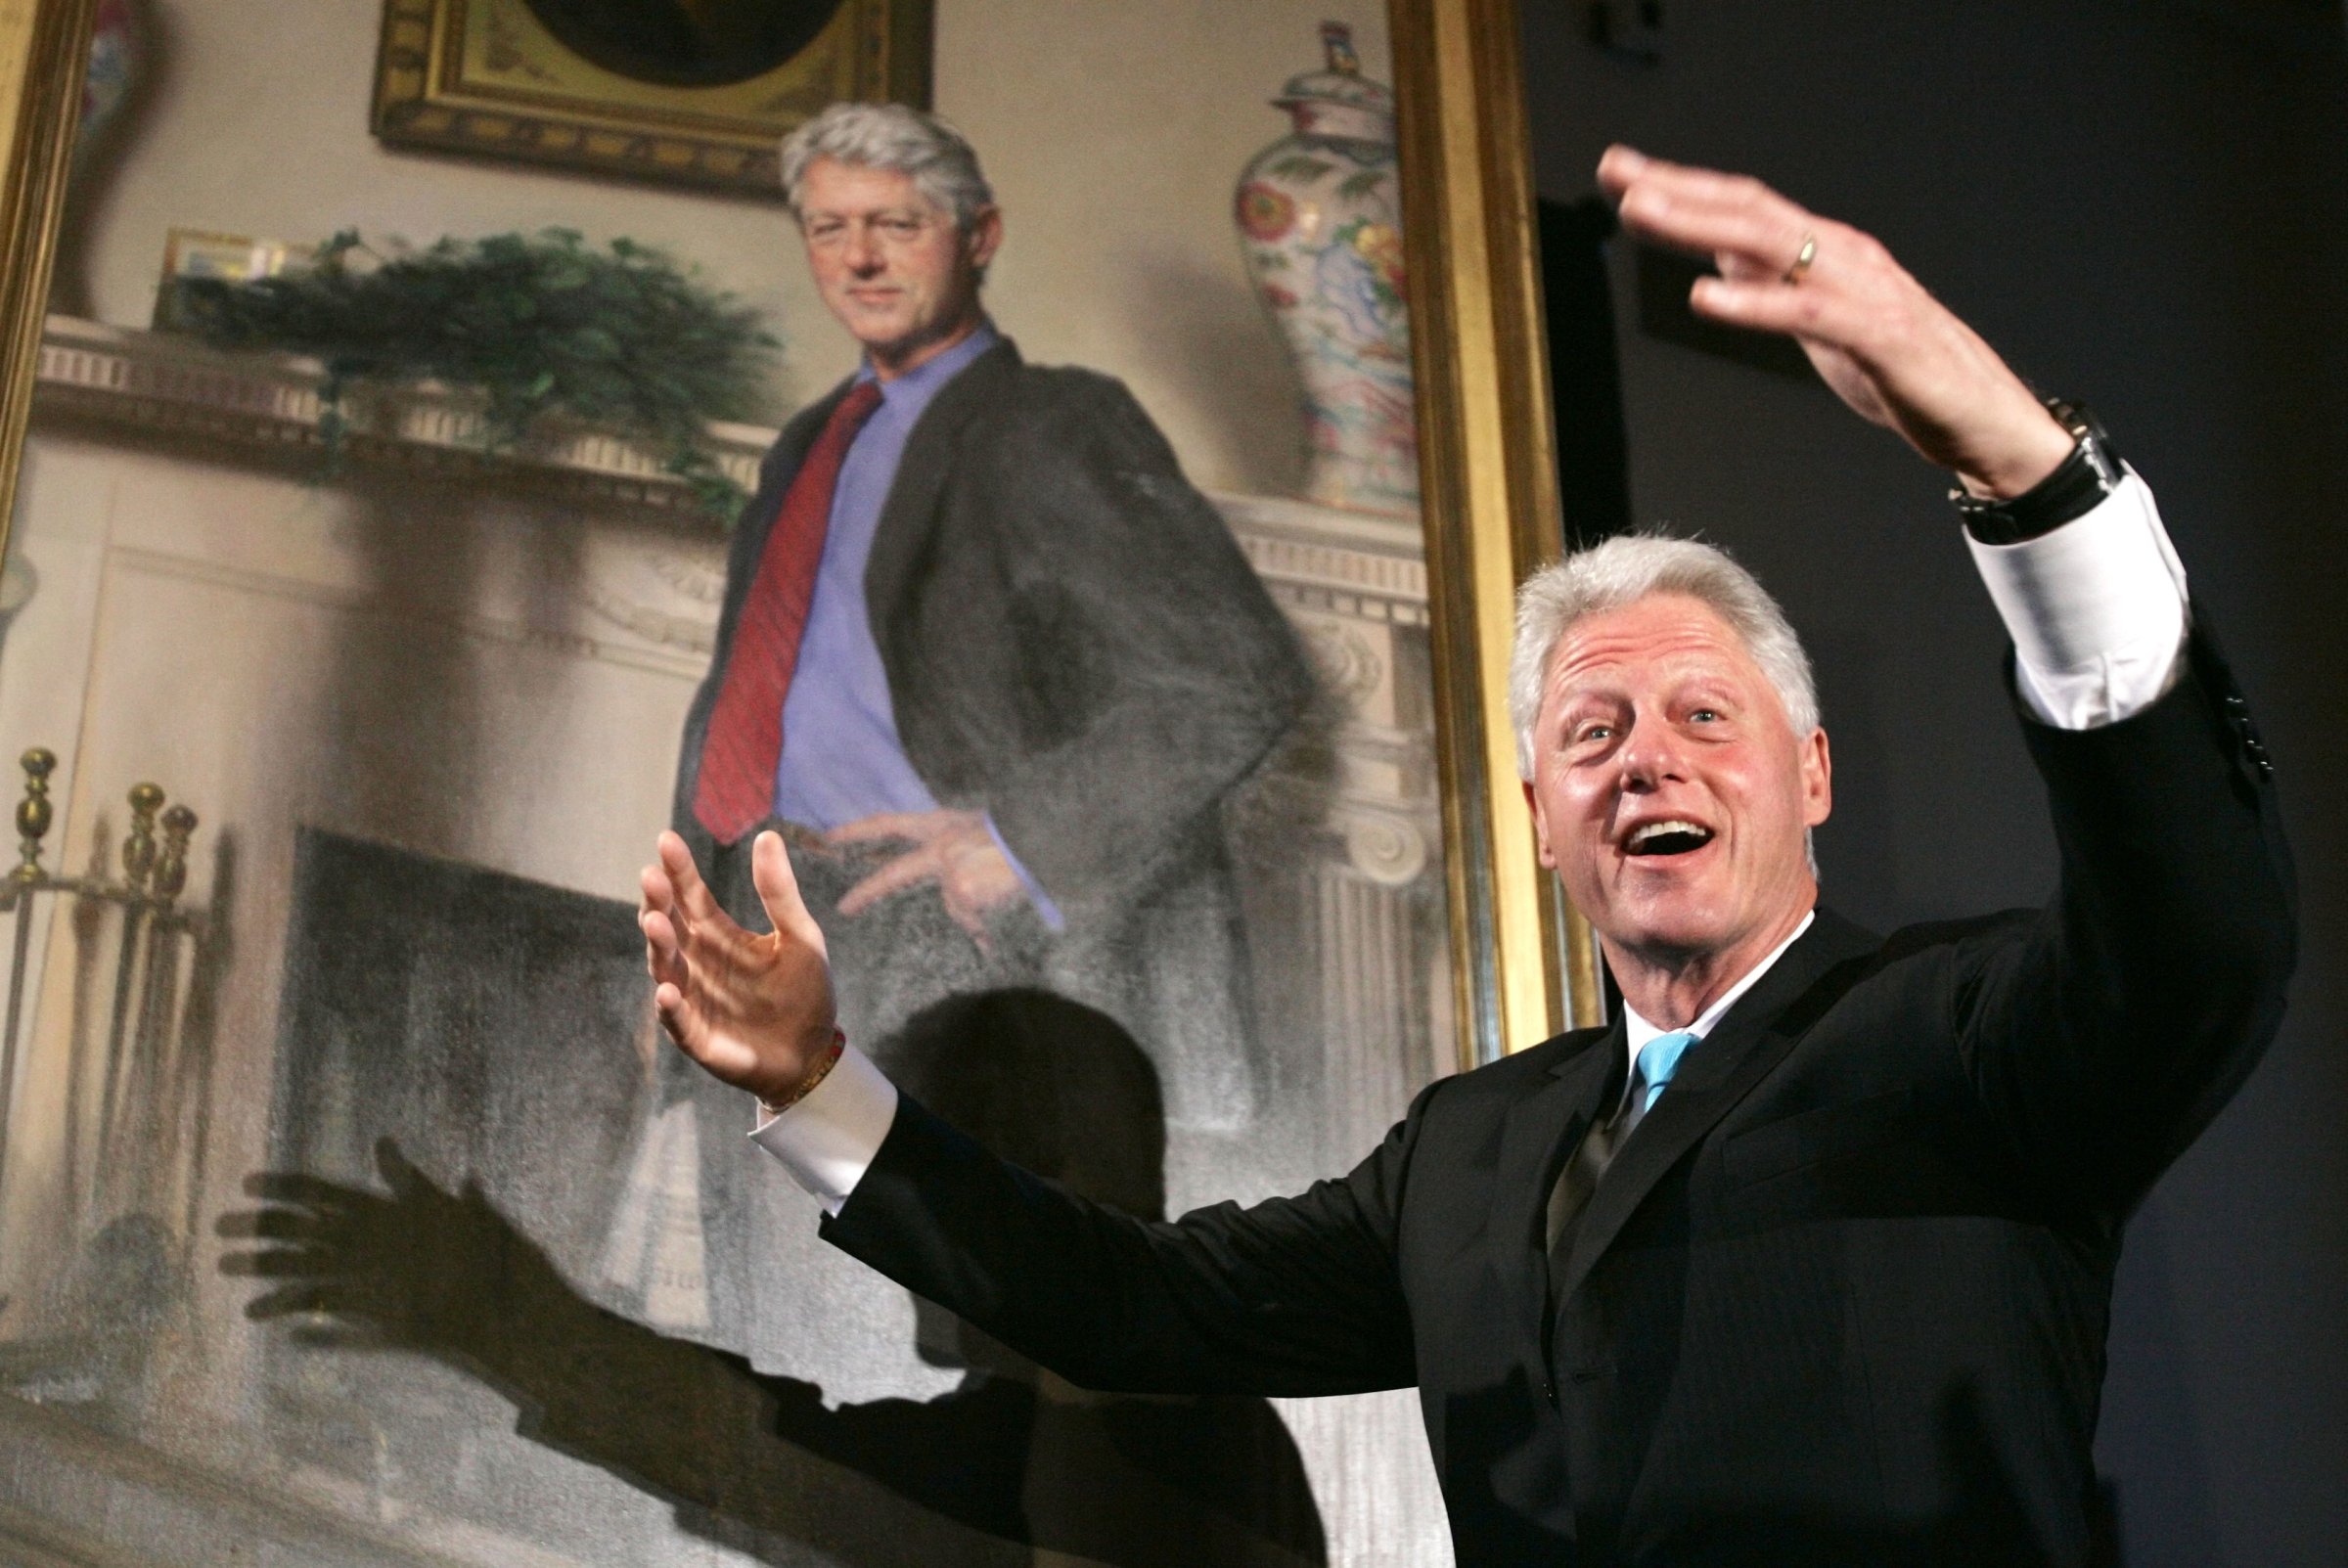 Former President Bill Clinton gestures after the portraits of his wife, Hillary Rodham Clinton and him, were revealed on April 24, 2006 at the Smithsonian Castle Building in Washington D.C.